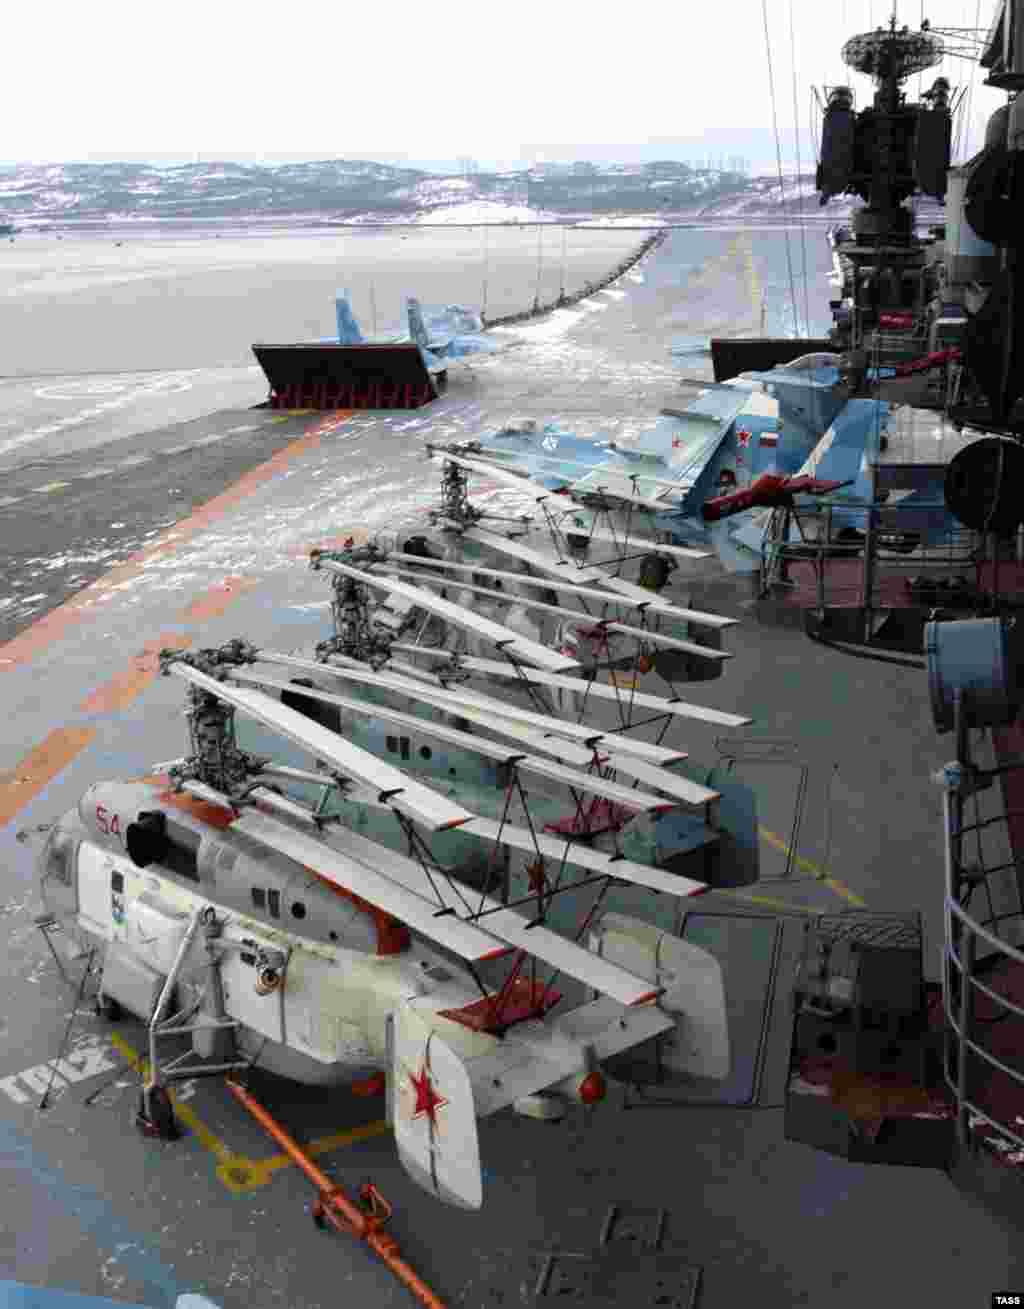 Helicopters and fighter jets on the flight deck of the Admiral Kuznetsov. The carrier is capable of deploying with 52 aircraft aboard. The vessel&#39;s air wing, however, is limited by its lack of an aircraft catapult. Most modern aircraft carriers are fitted with a steam-powered catapult that flings aircraft along the deck runway.